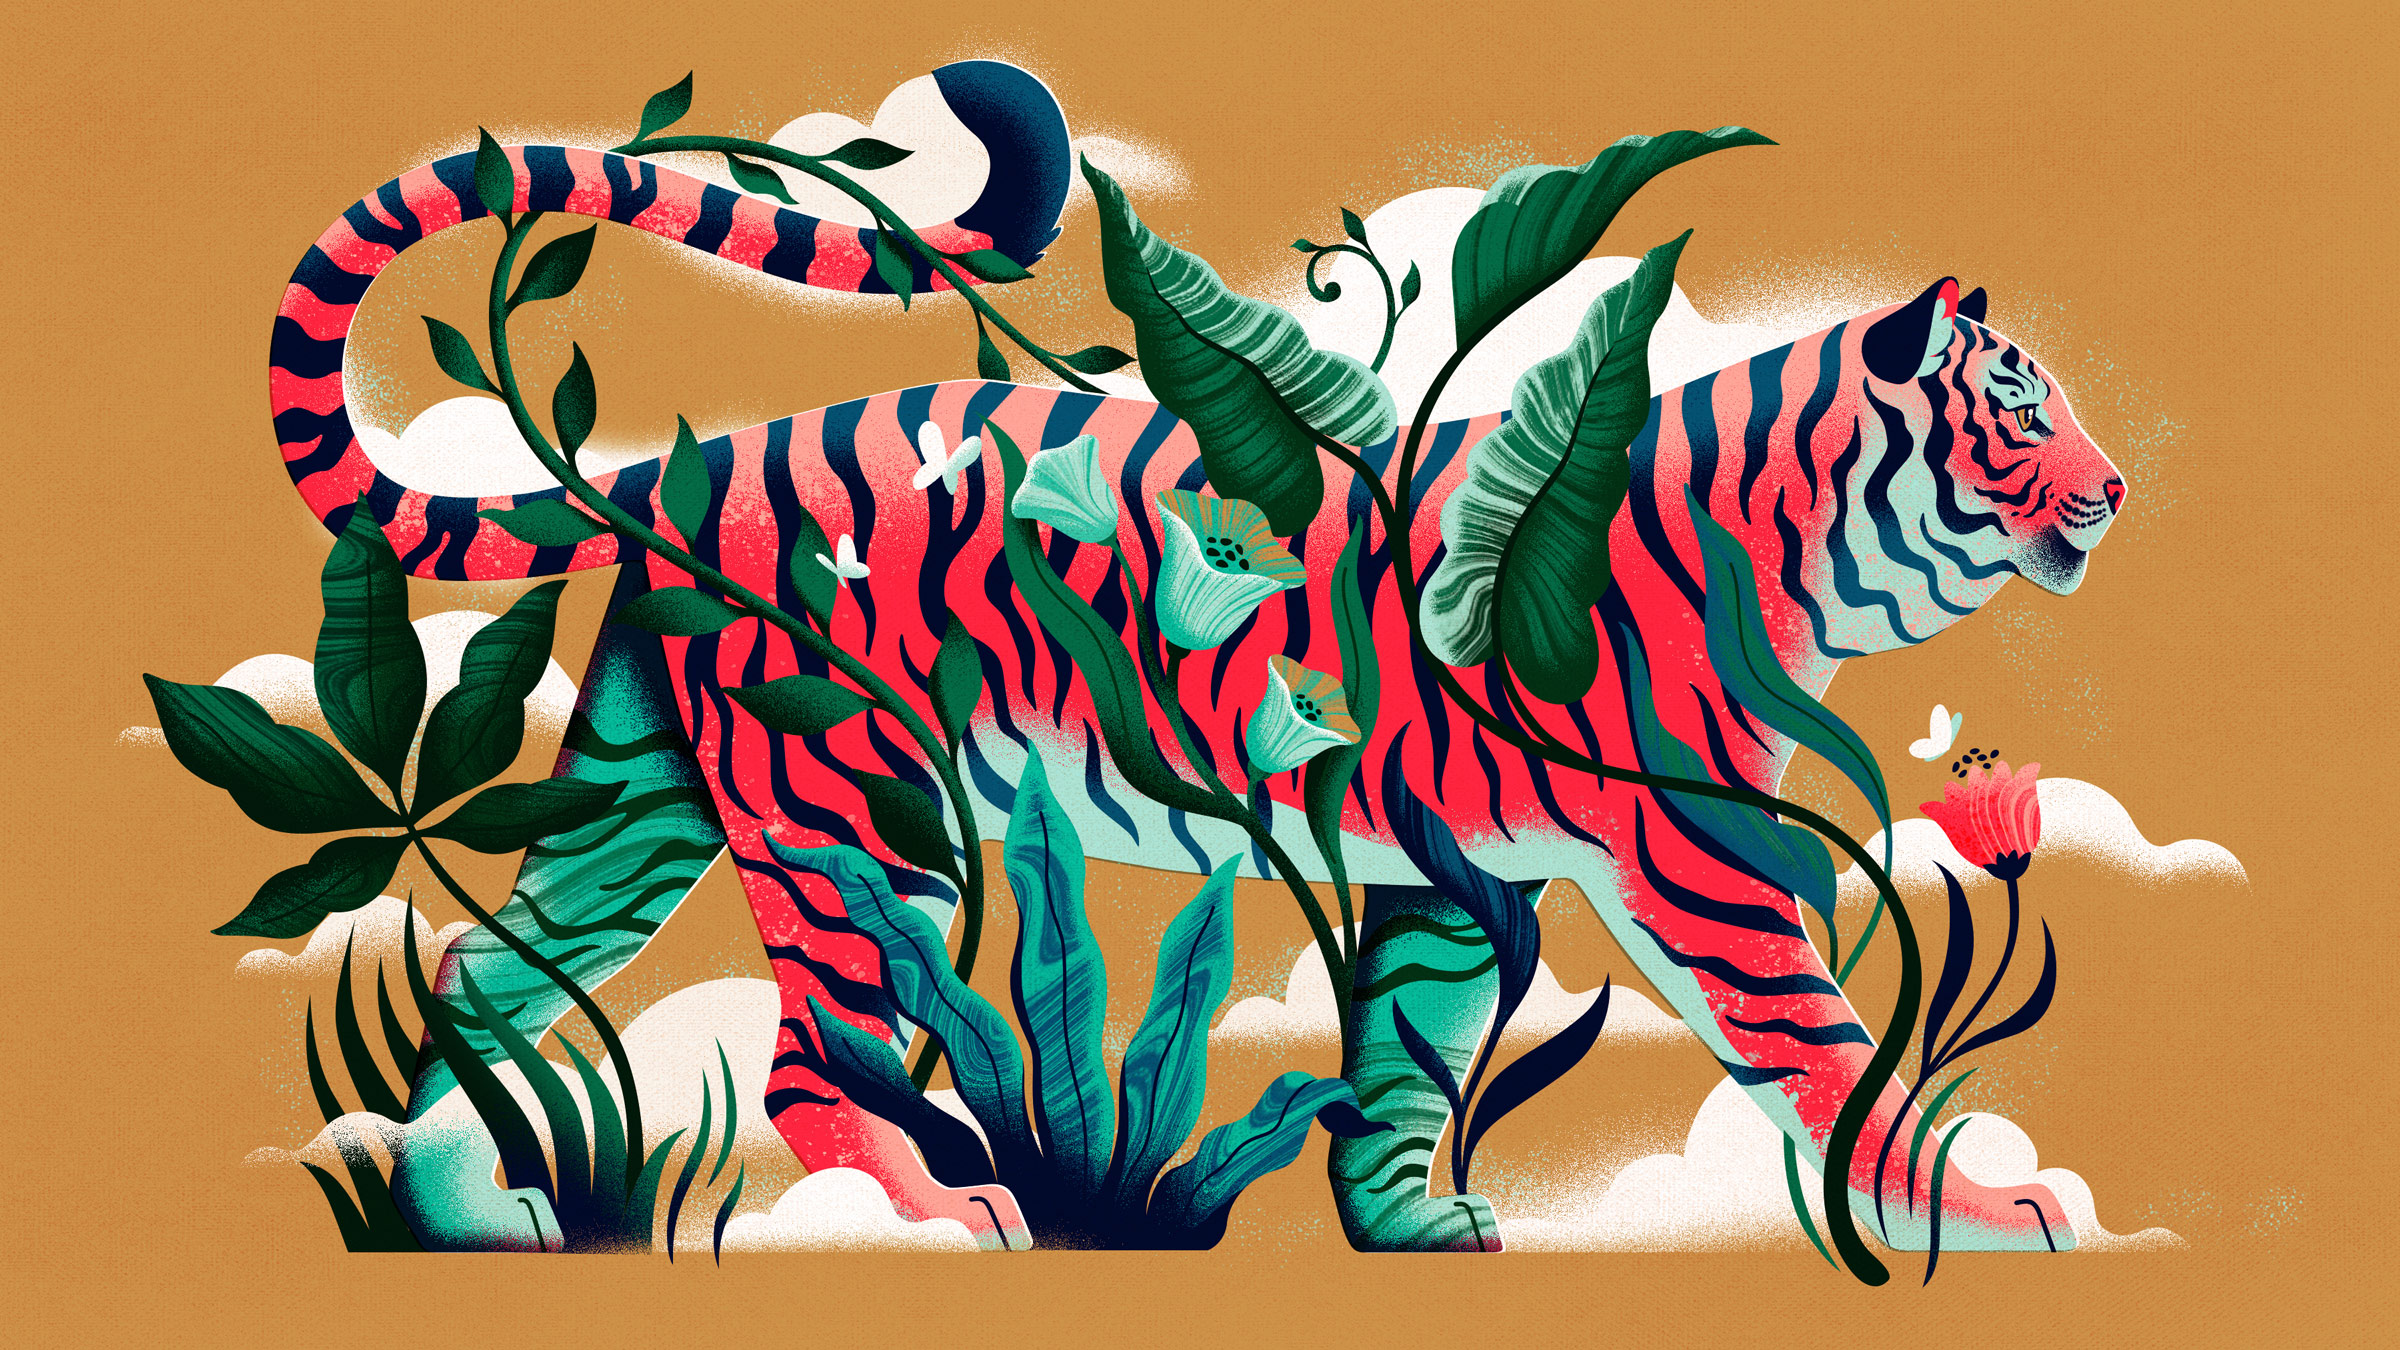 Year of the Tiger illustration